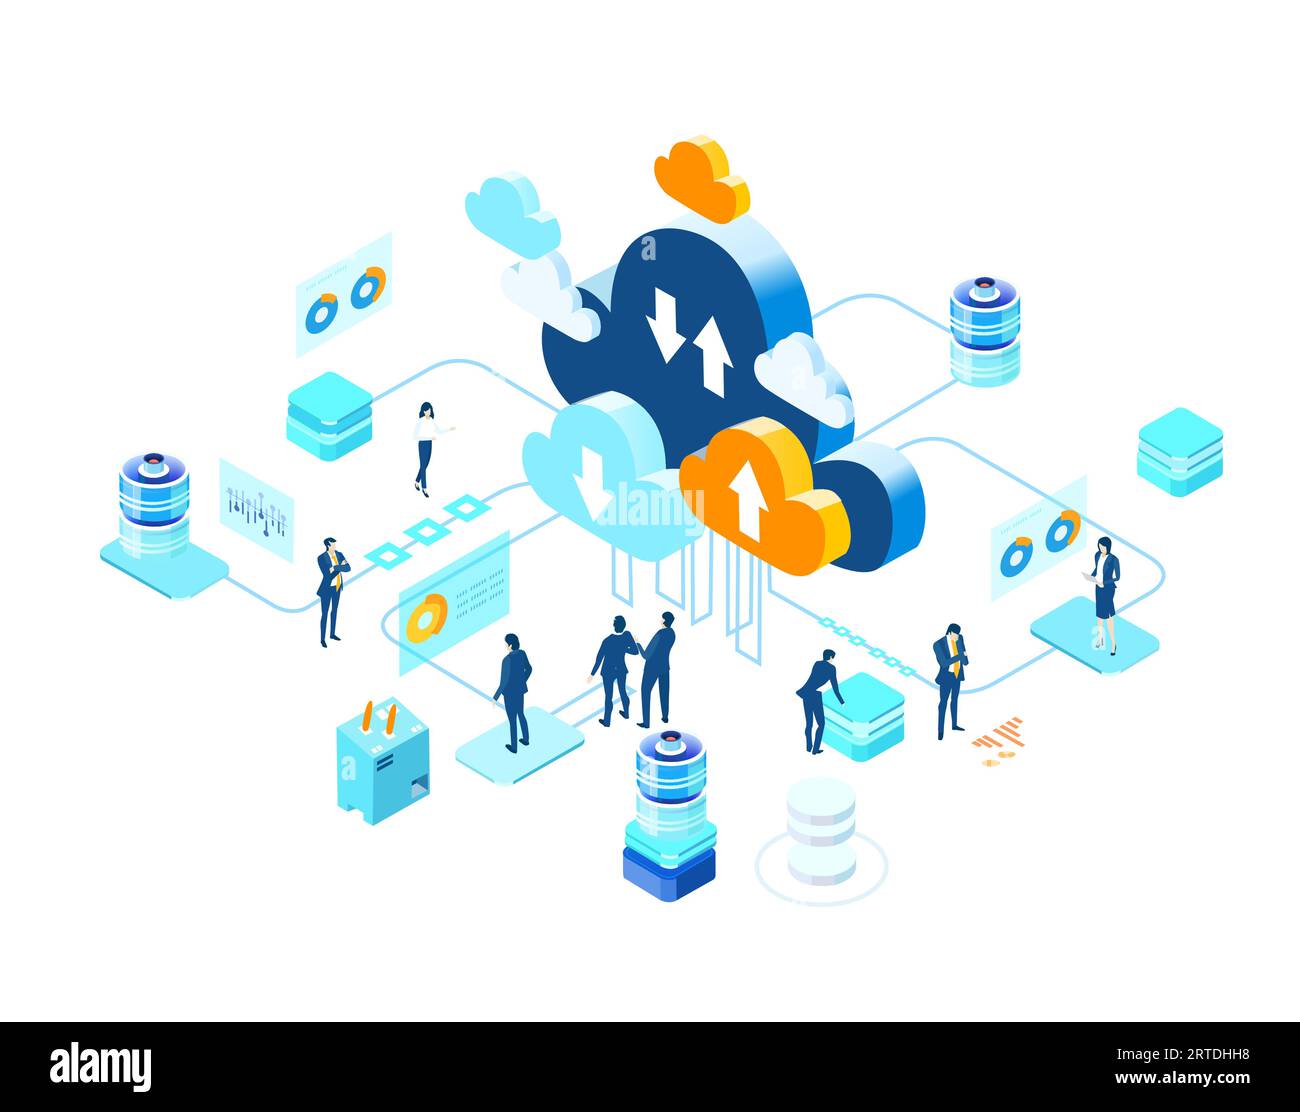 Isometric business environment. Business people, team working in server room, big data analyse, new business, start up, technology, computing consept Stock Vector